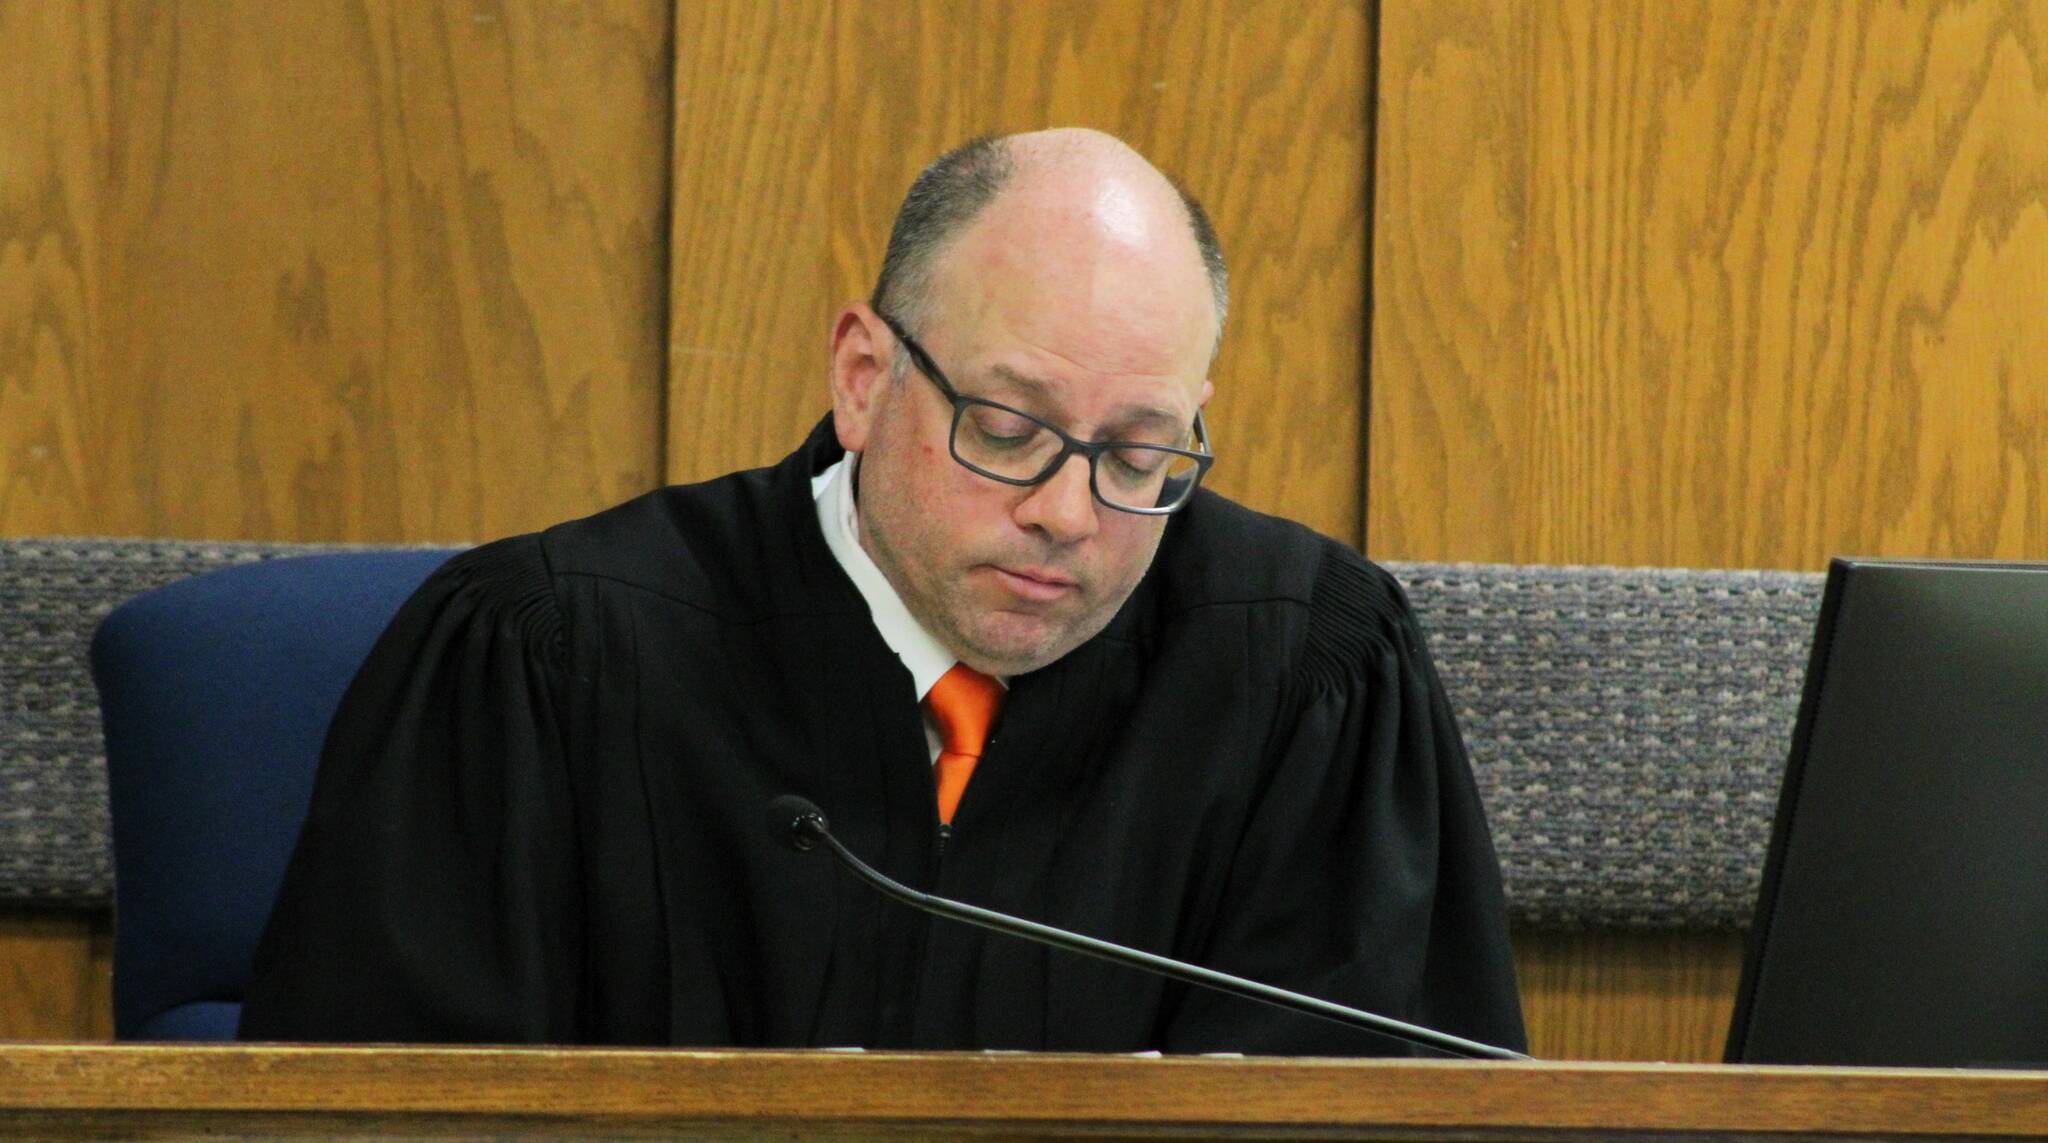 Judge Kevin Hull searches for the right words before handing down sentences against the three men convicted of the Careaga quadruple homicides.